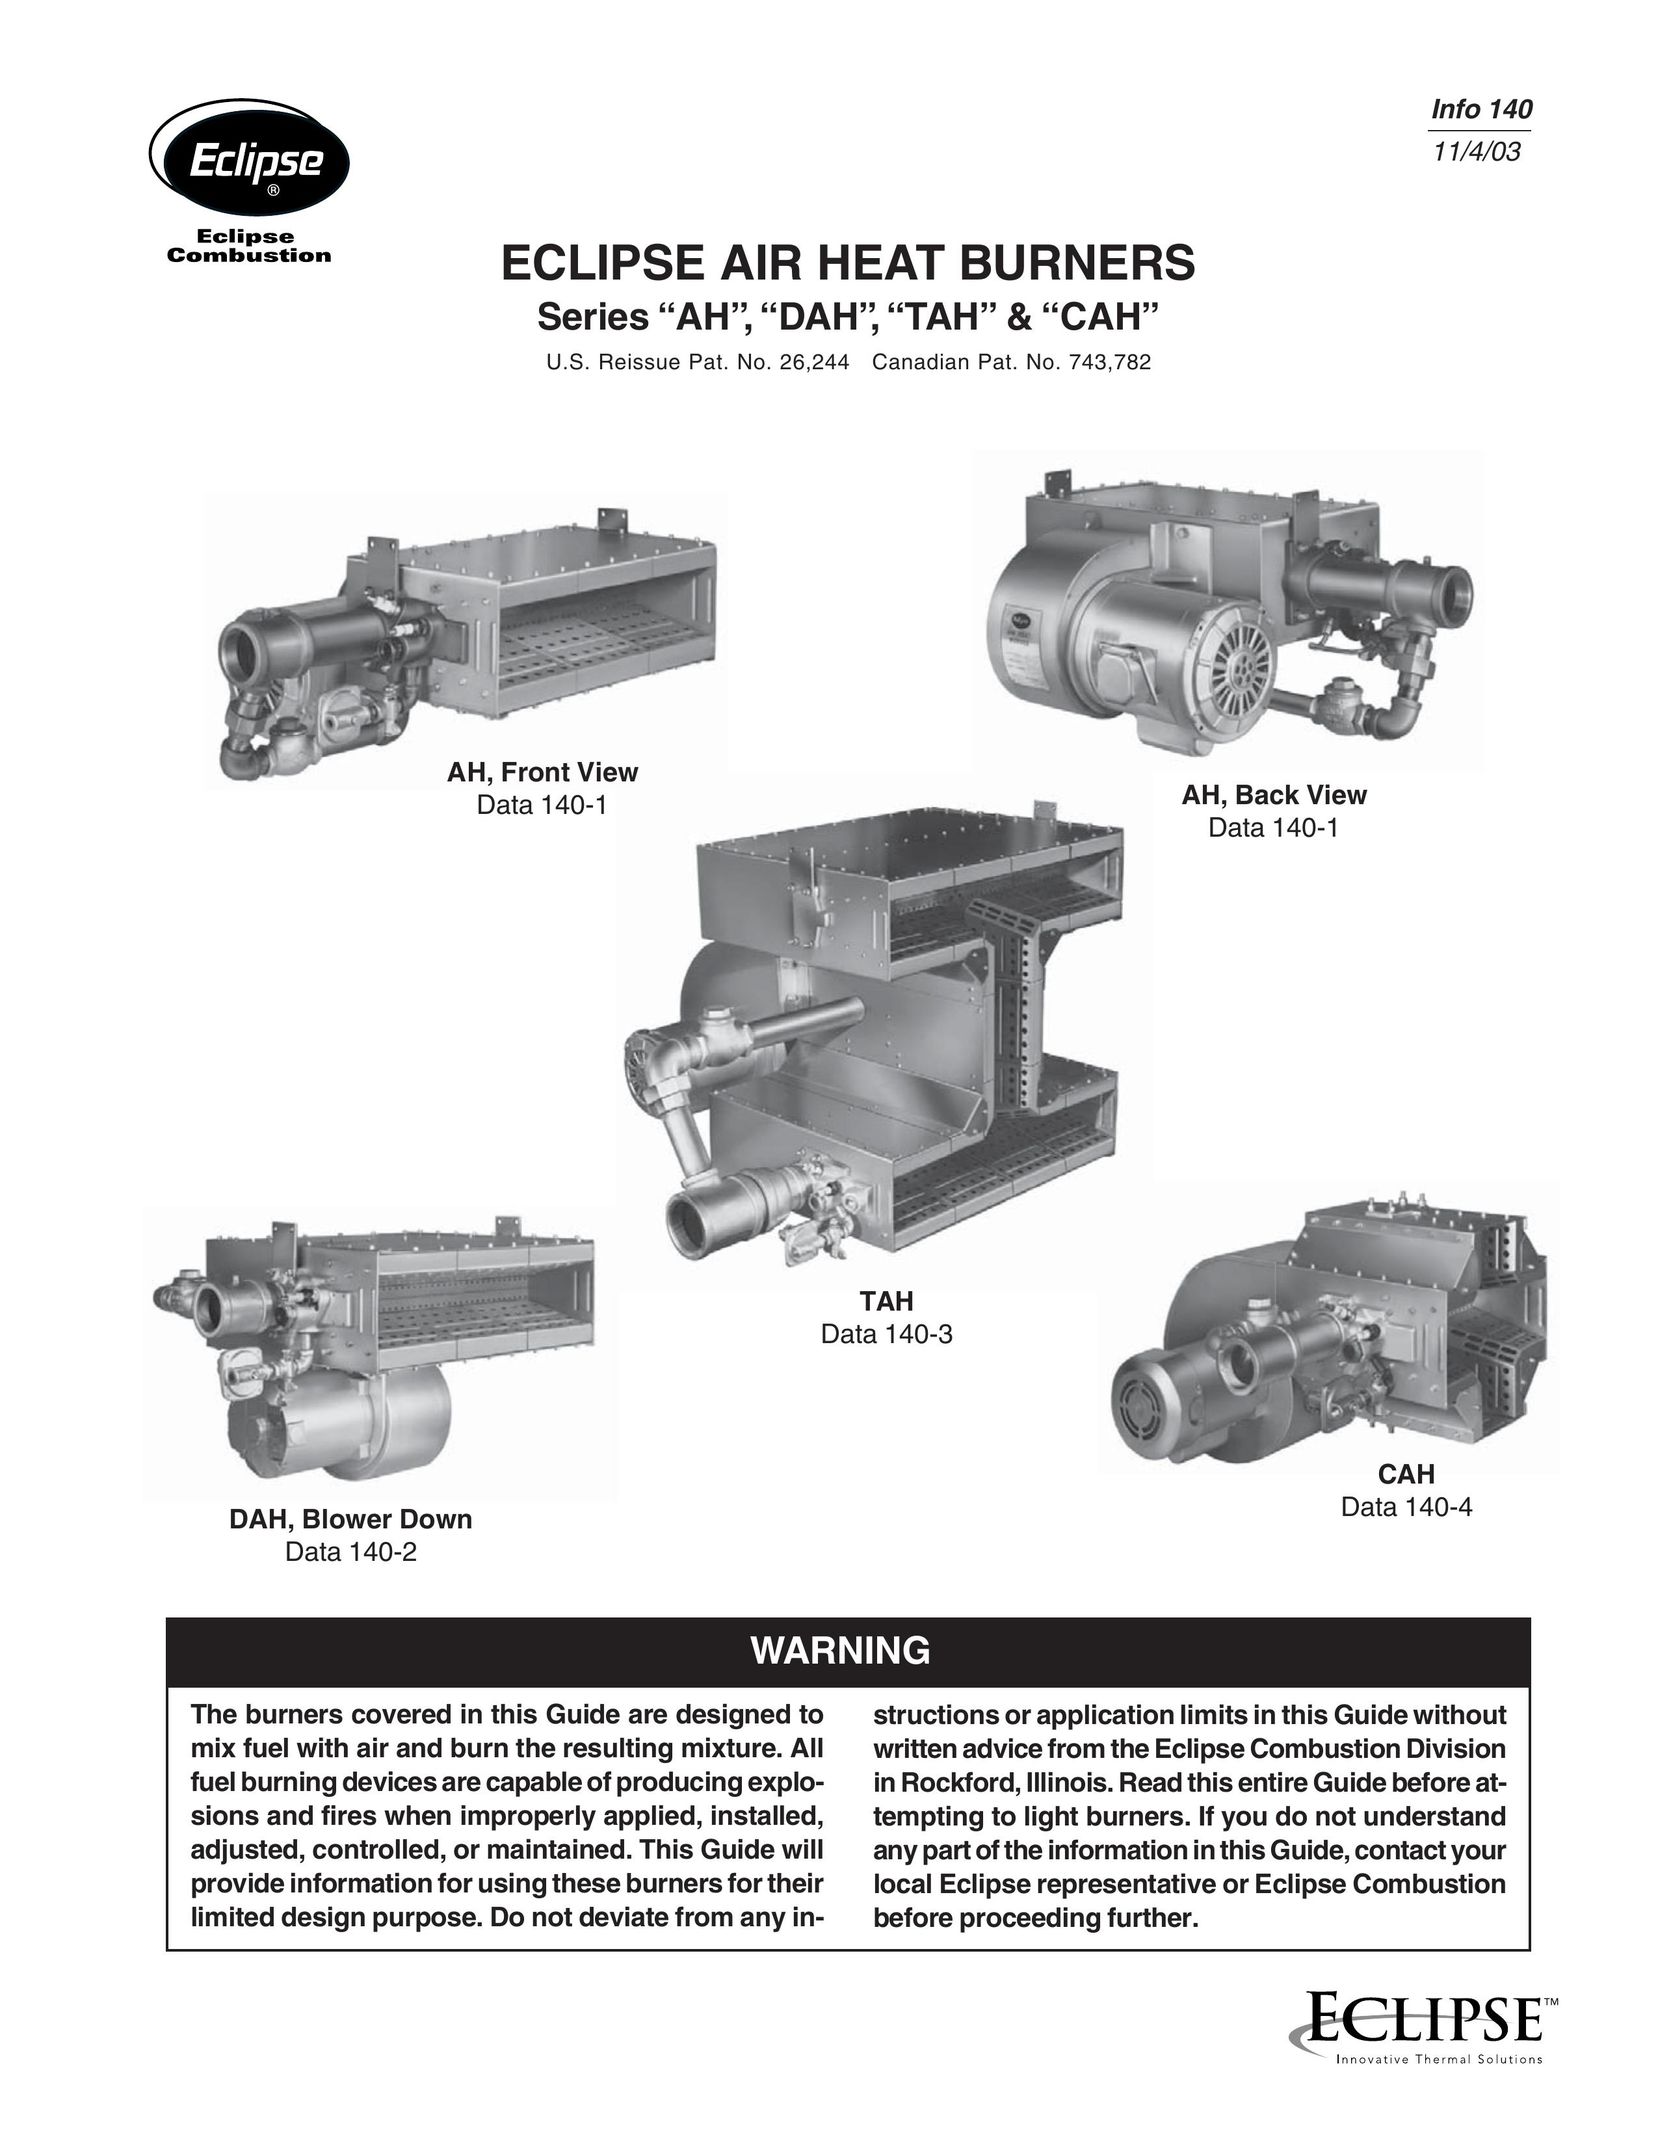 Eclipse Combustion AH Air Conditioner User Manual